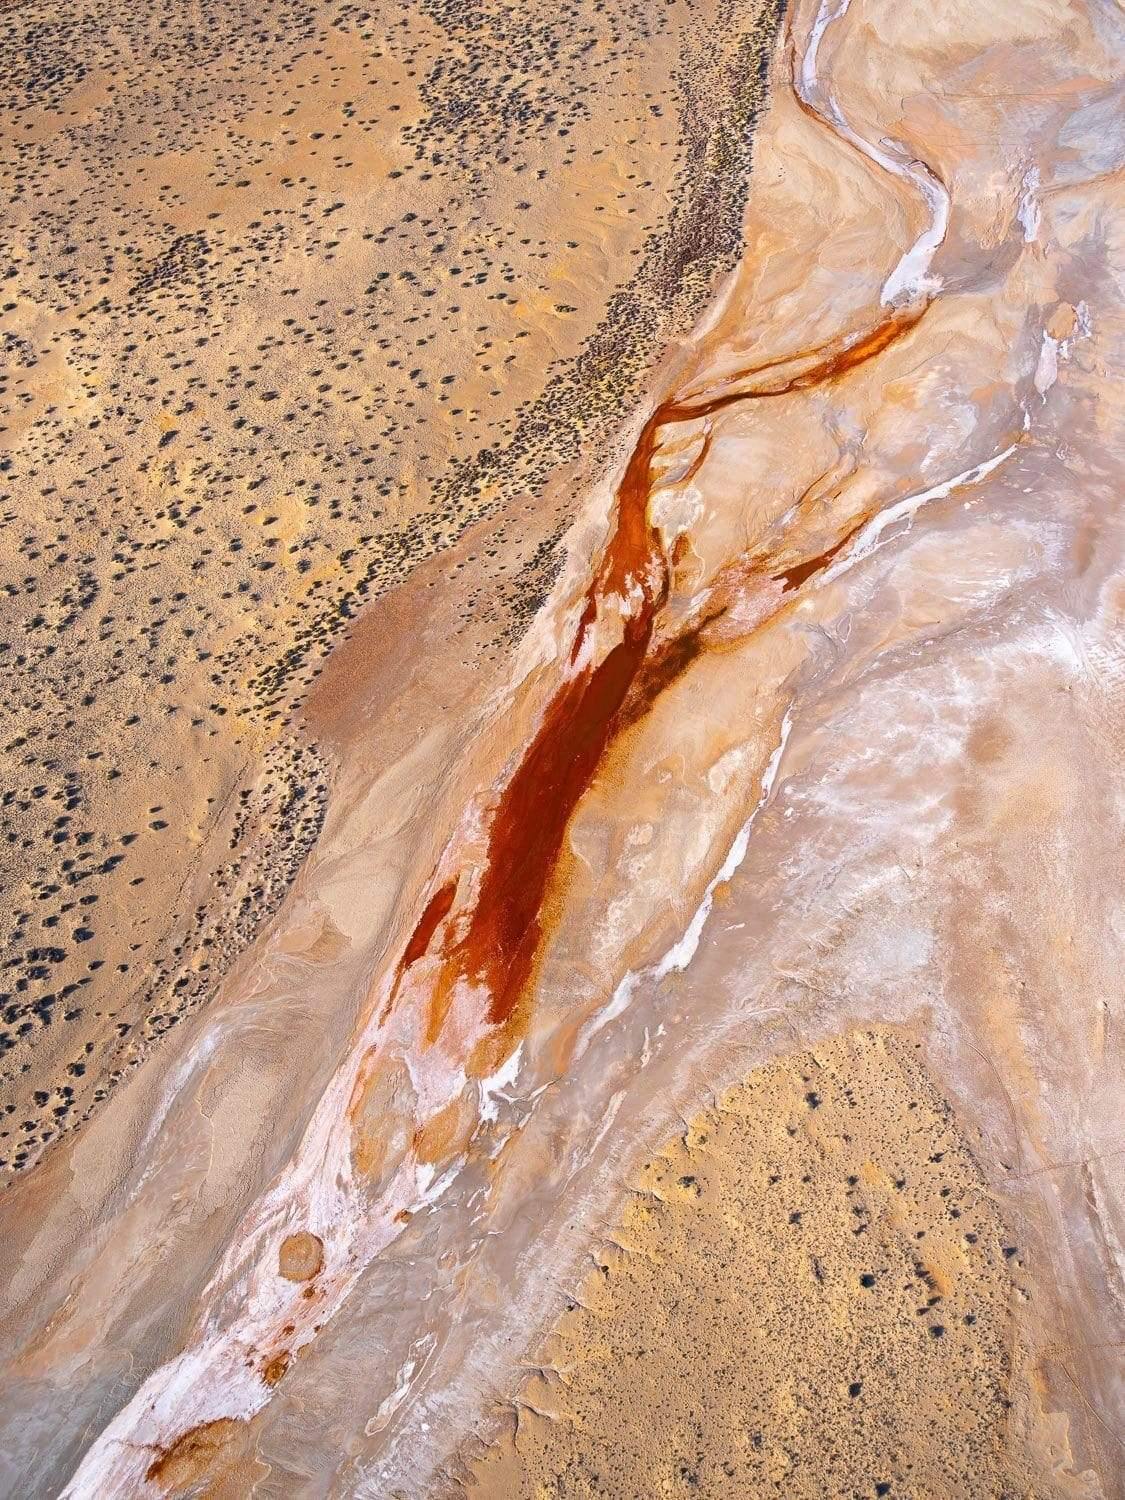 A portrait of large desert land with countless small stones and their shadows, a bloodline-like centric area with some dark brown liquid and smoky outlines around it, Desert Flame